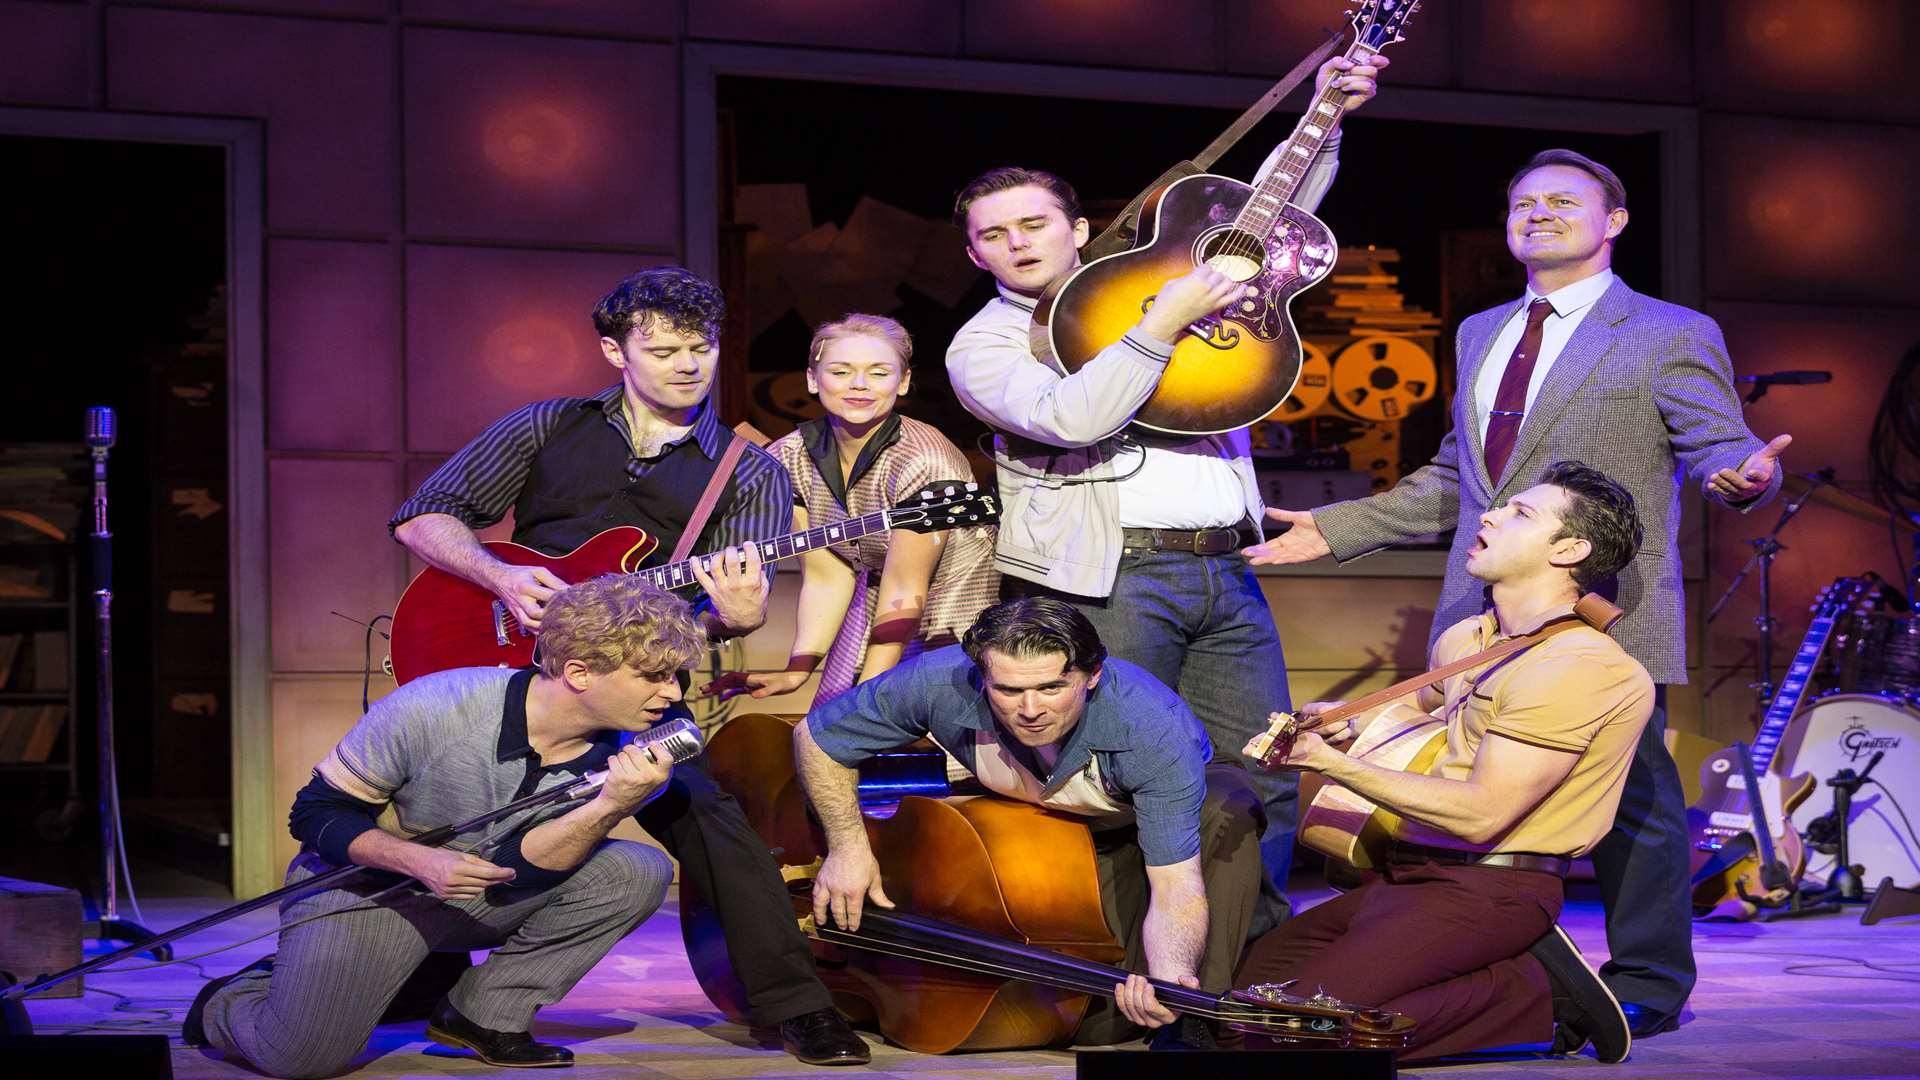 The show is inspired by the recording session that brought togethermusic icons Elvis Presley, Johnny Cash, Jerry Lee Lewis and Carl Perkins for the first and only time